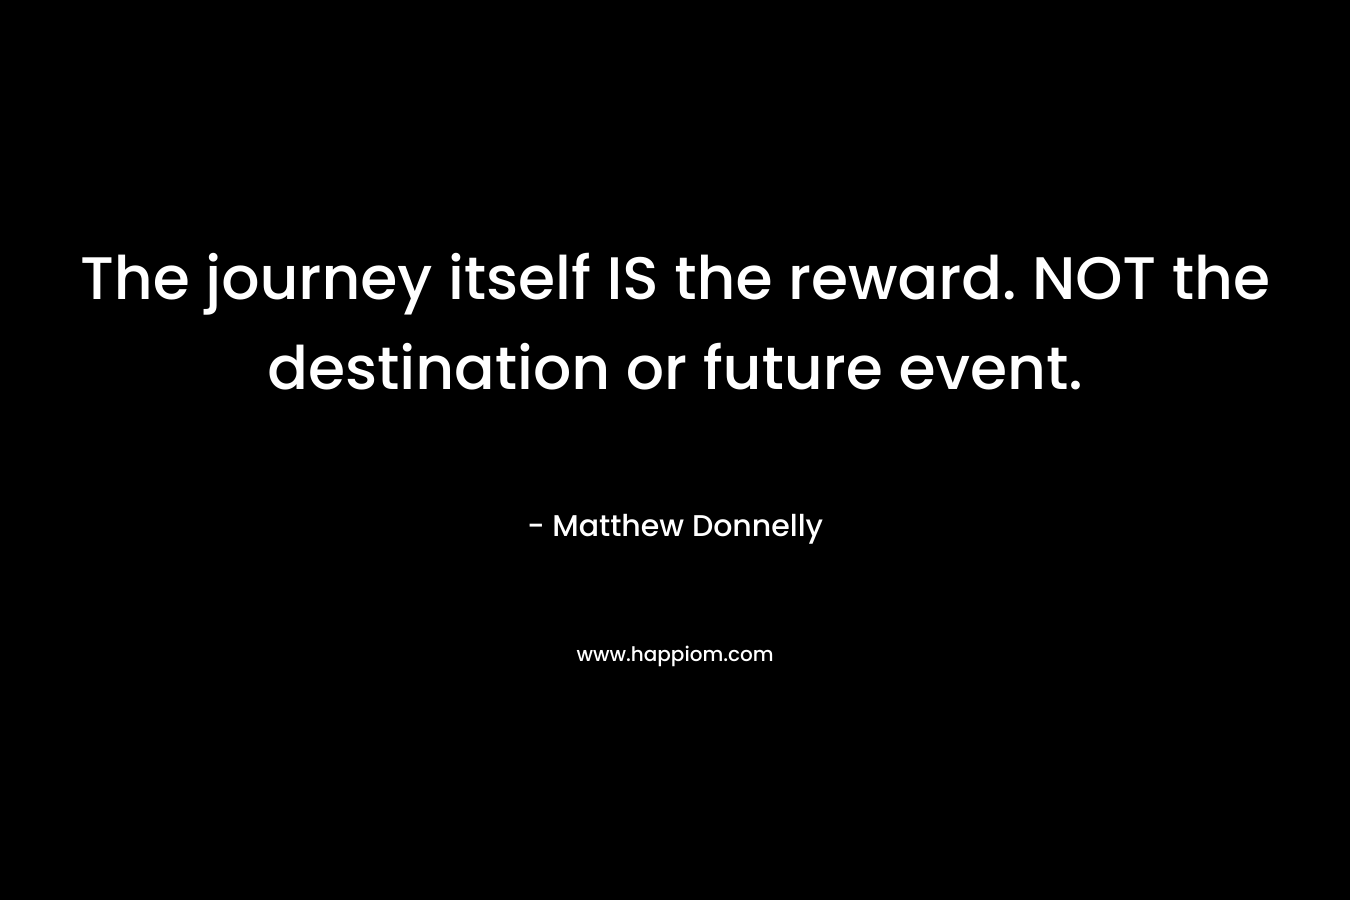 The journey itself IS the reward. NOT the destination or future event. – Matthew Donnelly